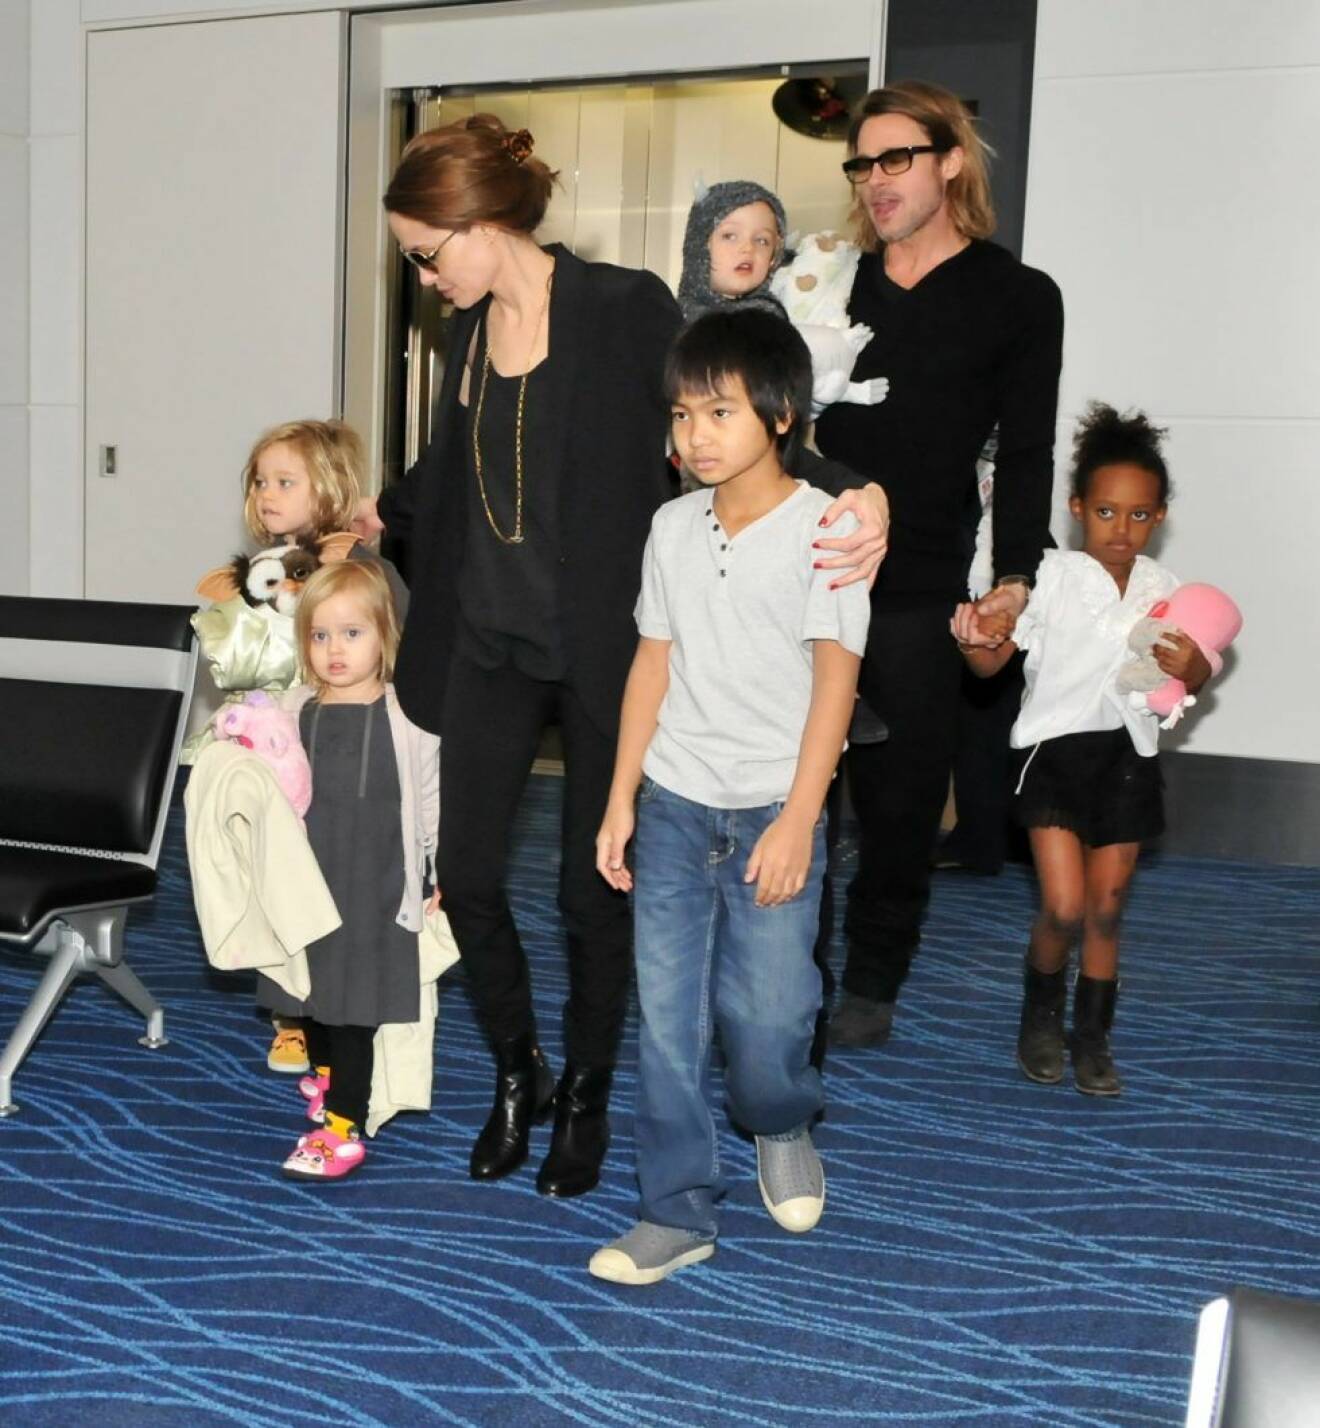 FILE PHOTO: Angelina Jolie files for divorce from Brad Pitt after 11 years together and two years of marriage. According to TMZ.com Jolie gave irreconcilable differences as the reason for the split and is requesting custody of the pairs 6 children. ..Photo shows Brad Pitt, Angelina Jolie, Nov 10, 2011 : Actor Brad Pitt and his family leave Japan on November 10, 2011. (Credit Image: © AFLO via ZUMA Press) (c) Zumapress / IBL